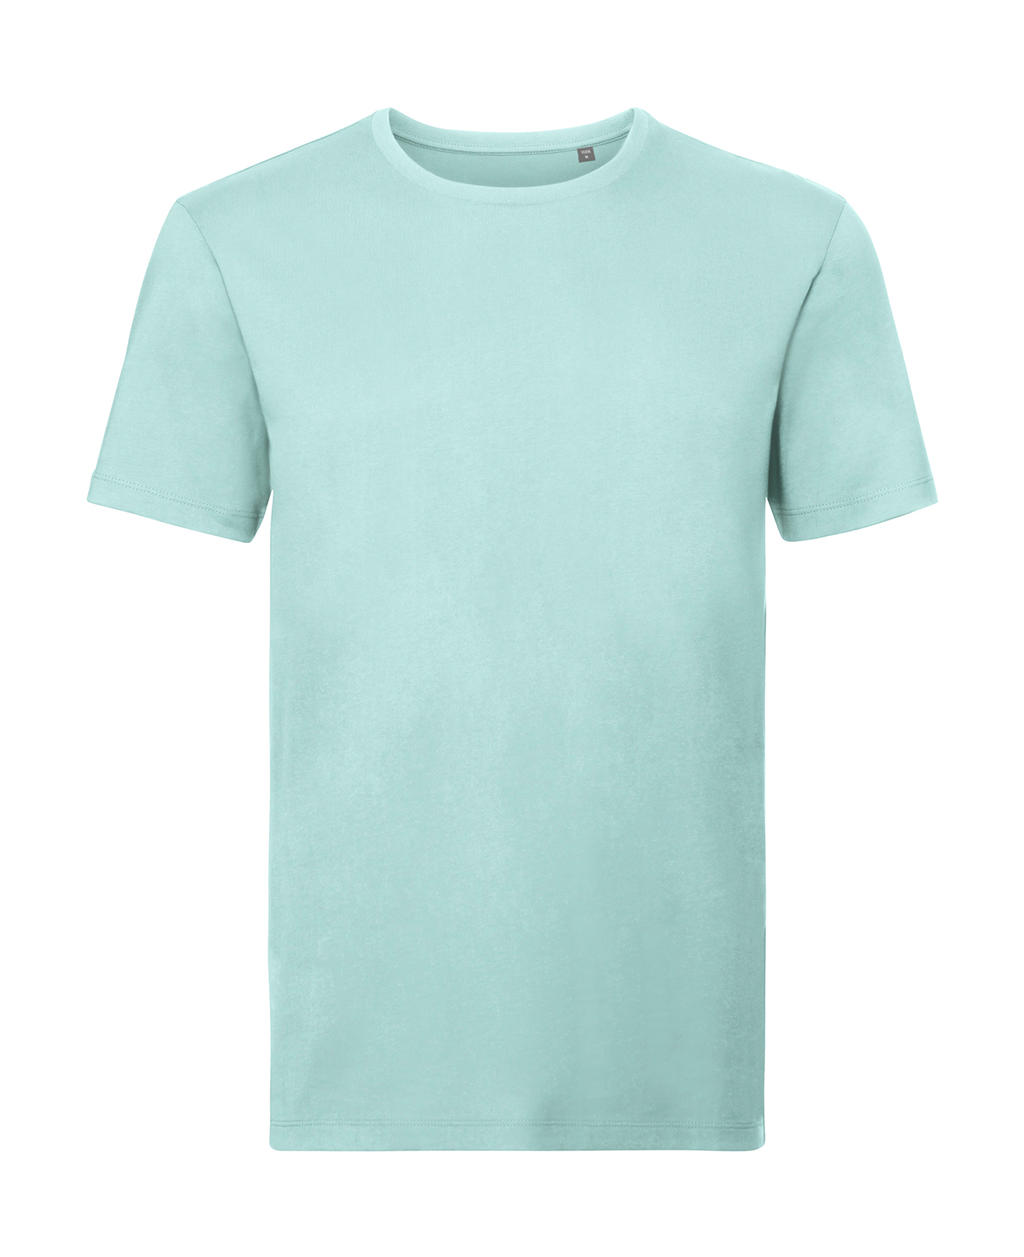 Russell europe - camiseta orgánica pure hombre - 119. 00